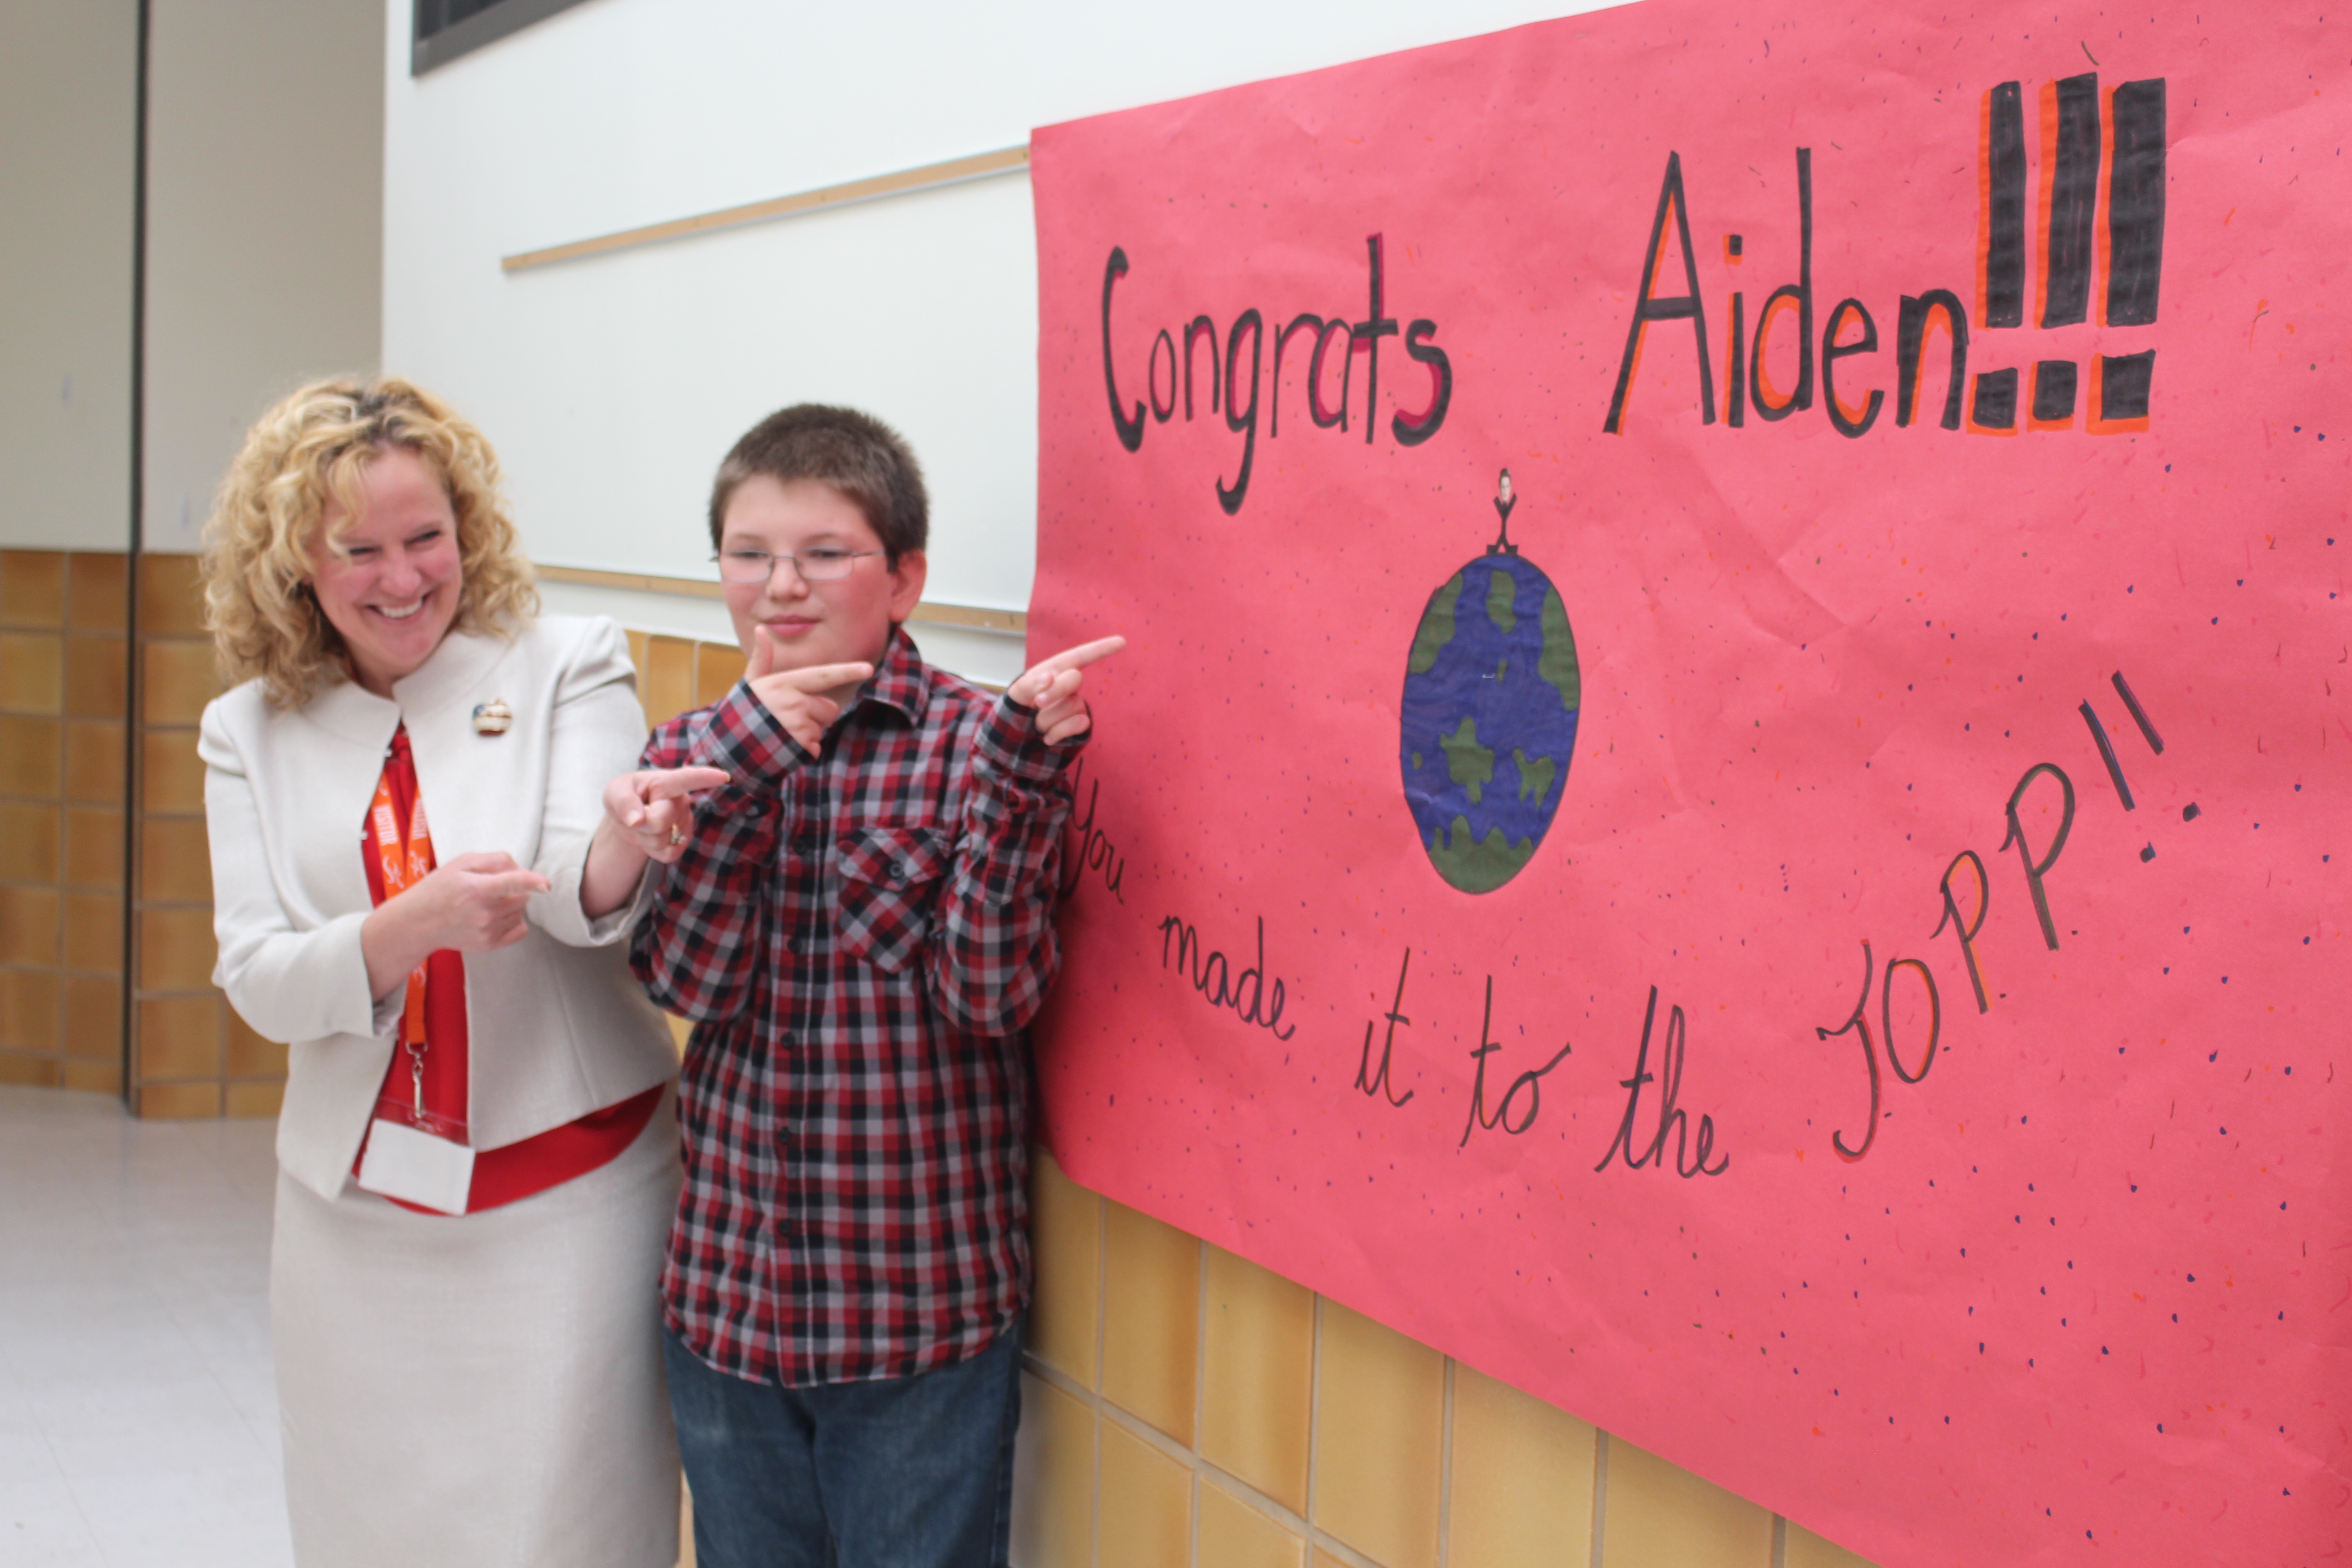 State Superintendent Jillian Balow and Aiden Weinzierl smile and point at a poster that says, "Congrats Aiden!!! You made it to the TOPP!!" and has a stick figure of Aiden sitting on top of the world.